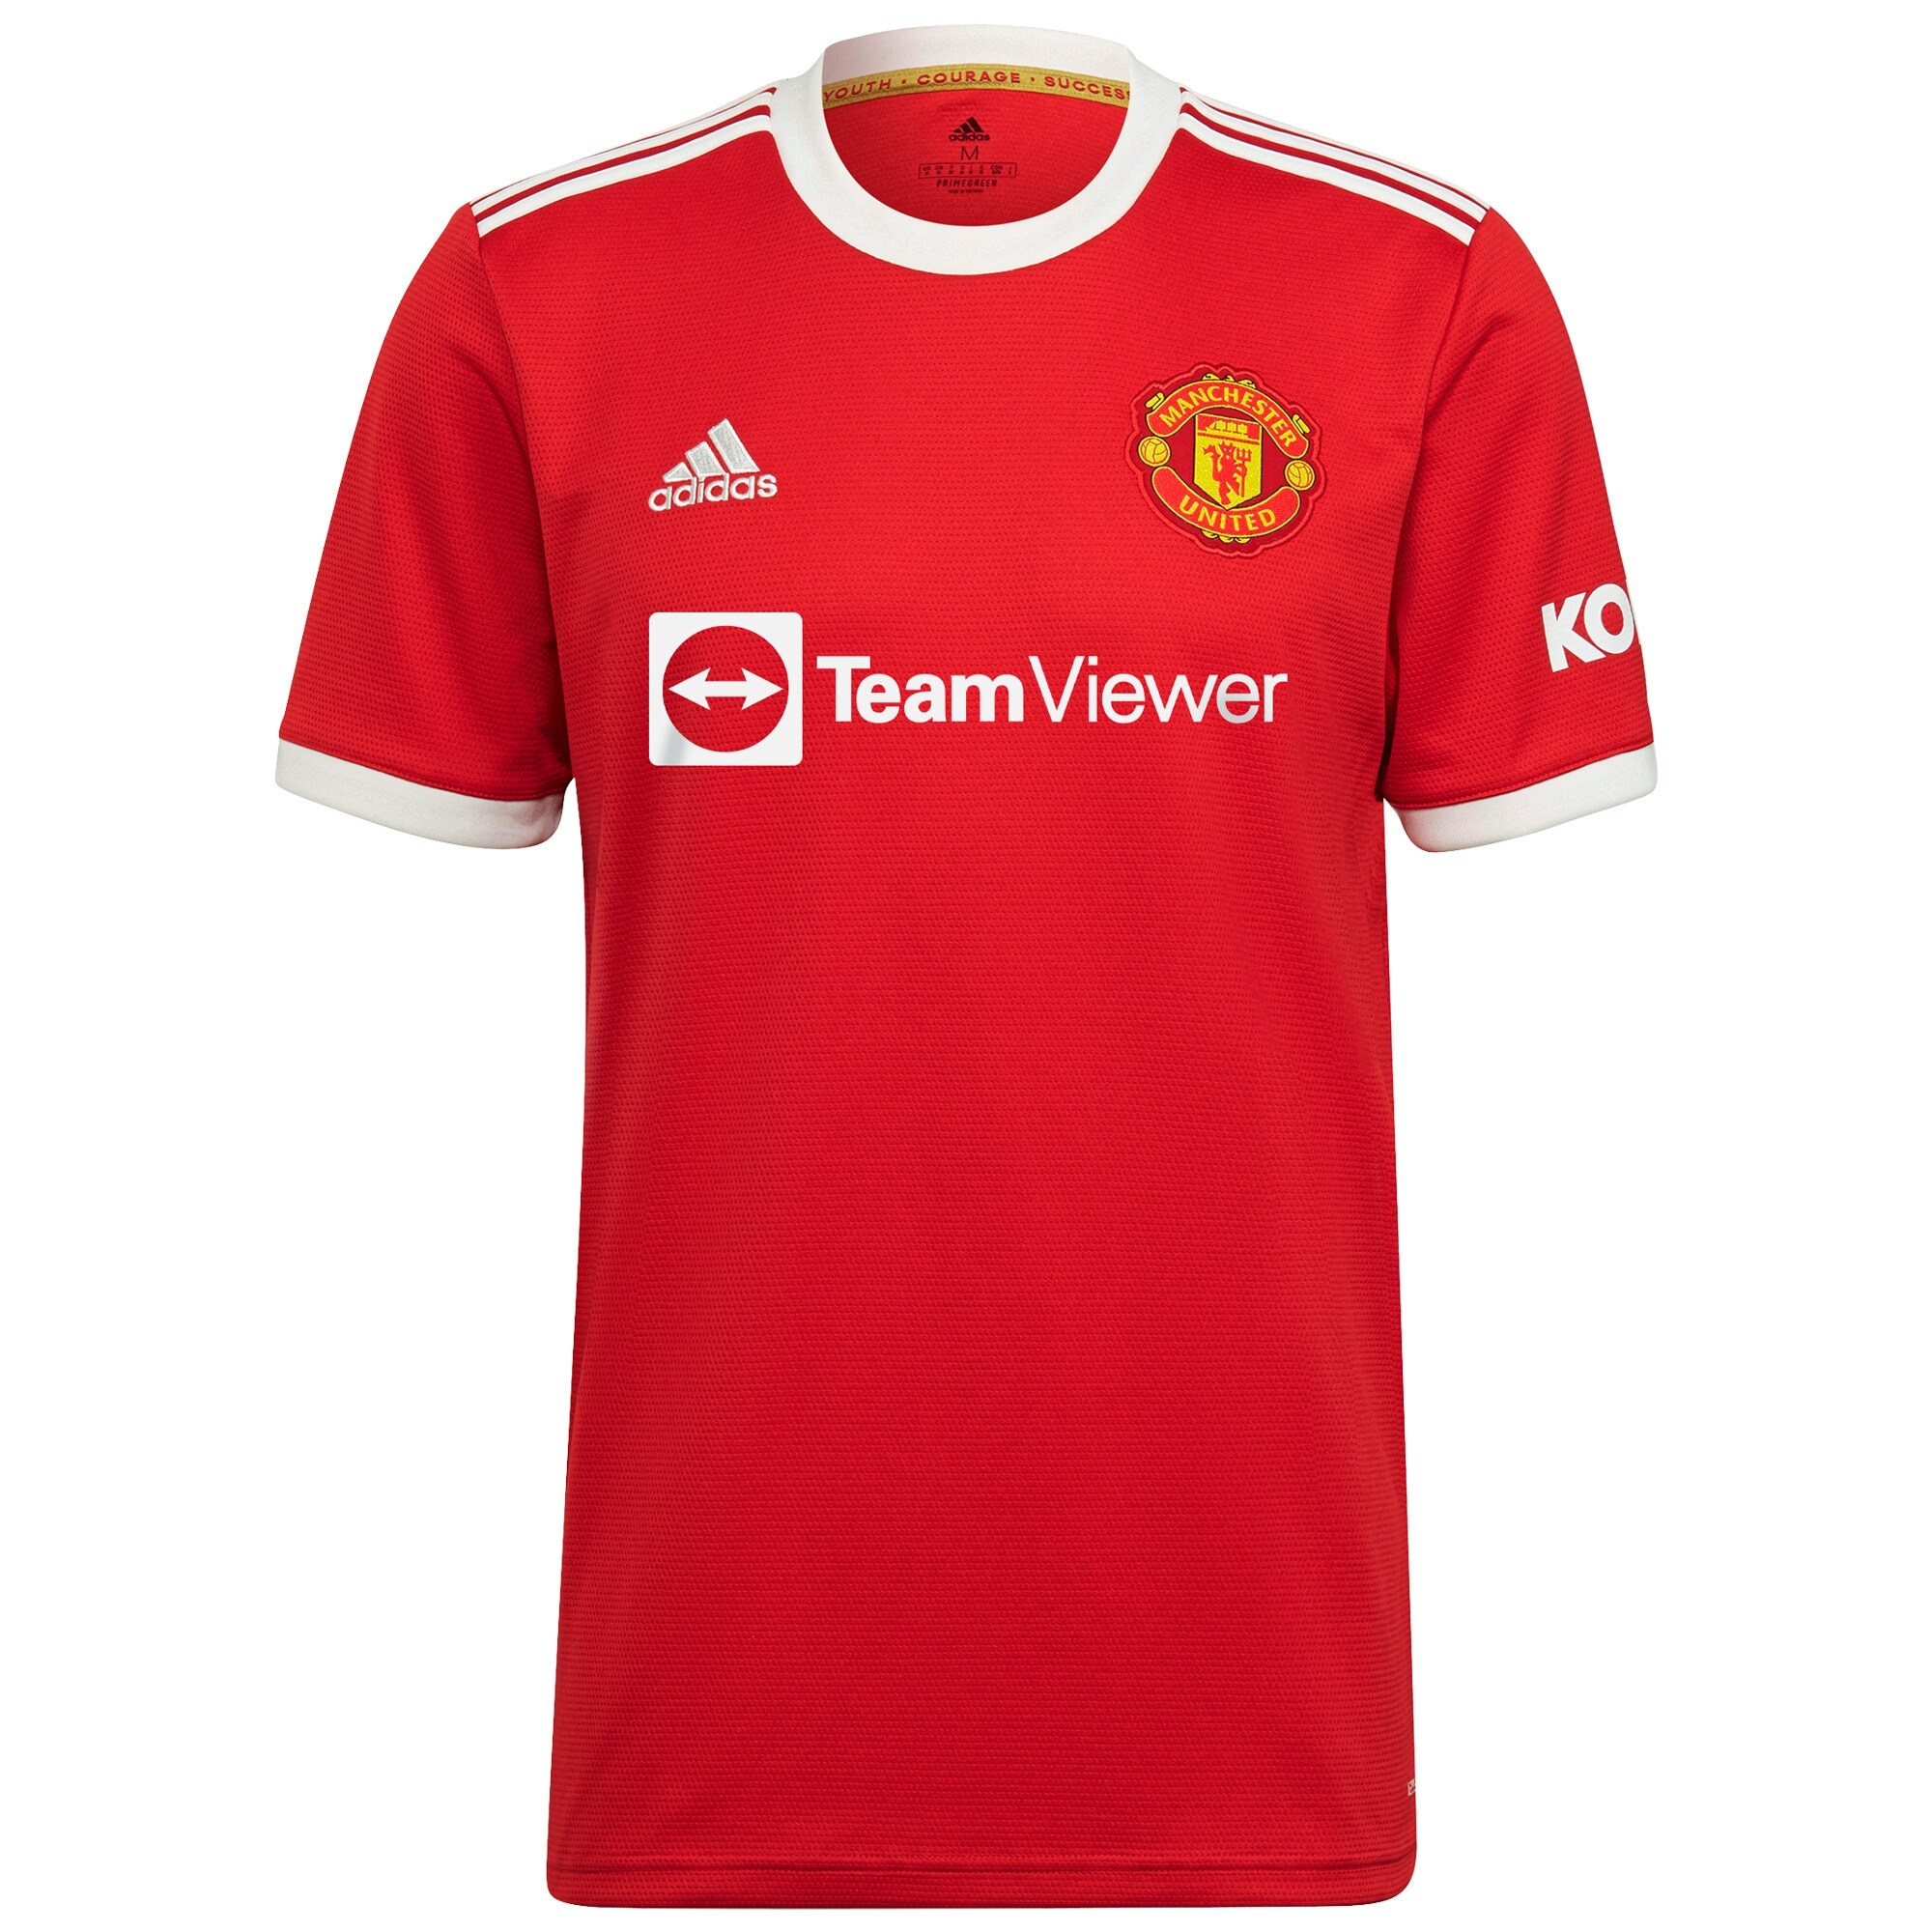 Manchester United Cup Home Shirt 2021-22 with Dalot 20 printing